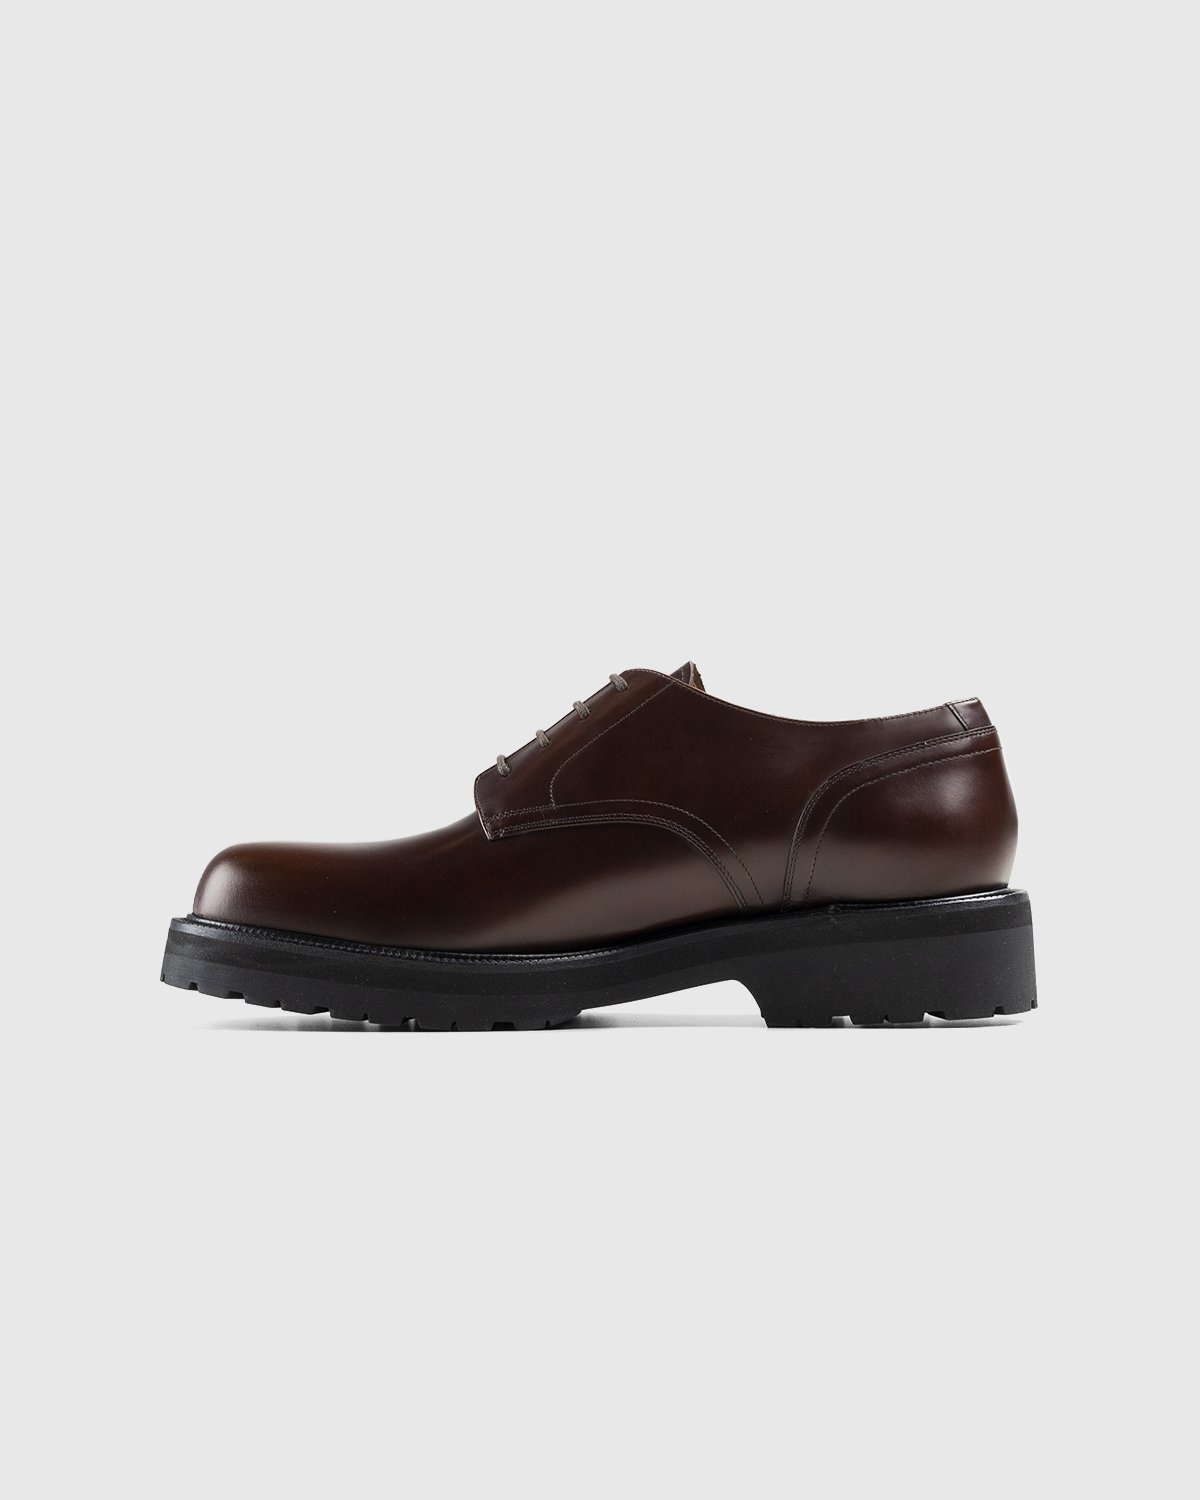 Dries van Noten – Leather Lace-Up Derby Shoes Brown - Oxfords & Lace Ups - Brown - Image 2